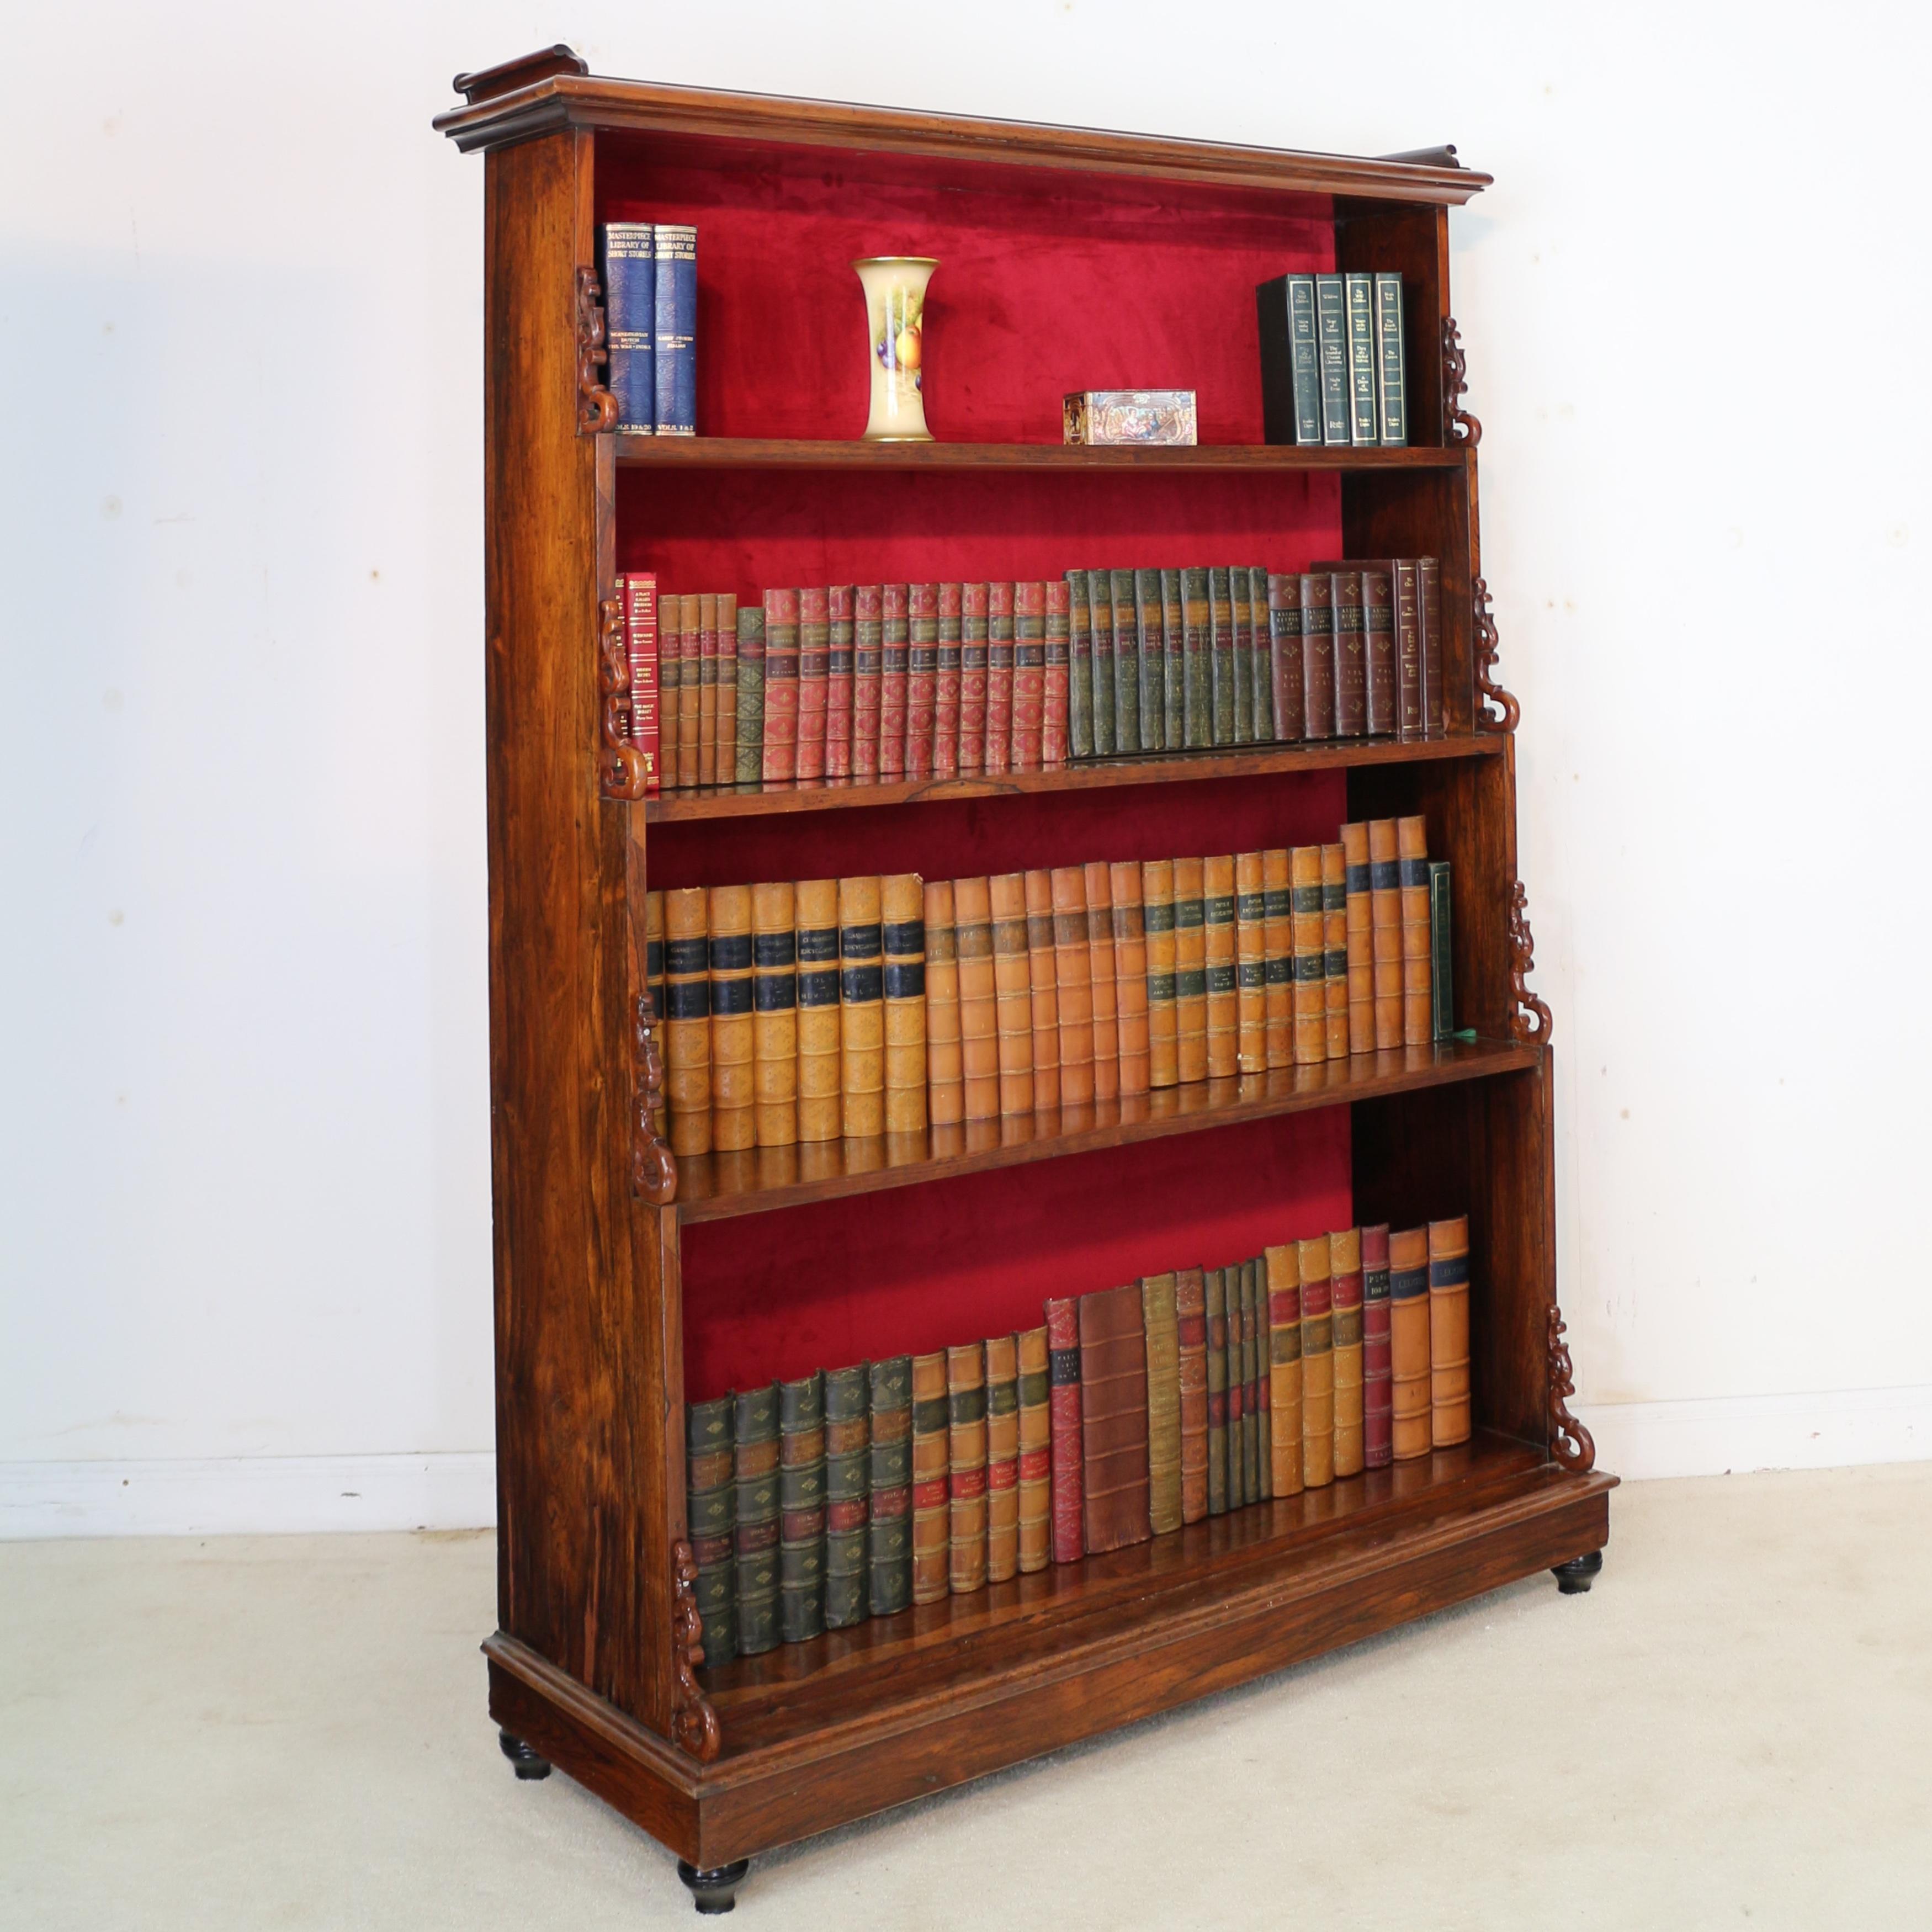 A fine quality Regency rosewood waterfall bookcase dating to circa 1820. The rectangular top with a scrolled gallery over four graduated shelves with scrolling pierced mounts, on a plinth base with four turned ebonized feet. The paneled back covered